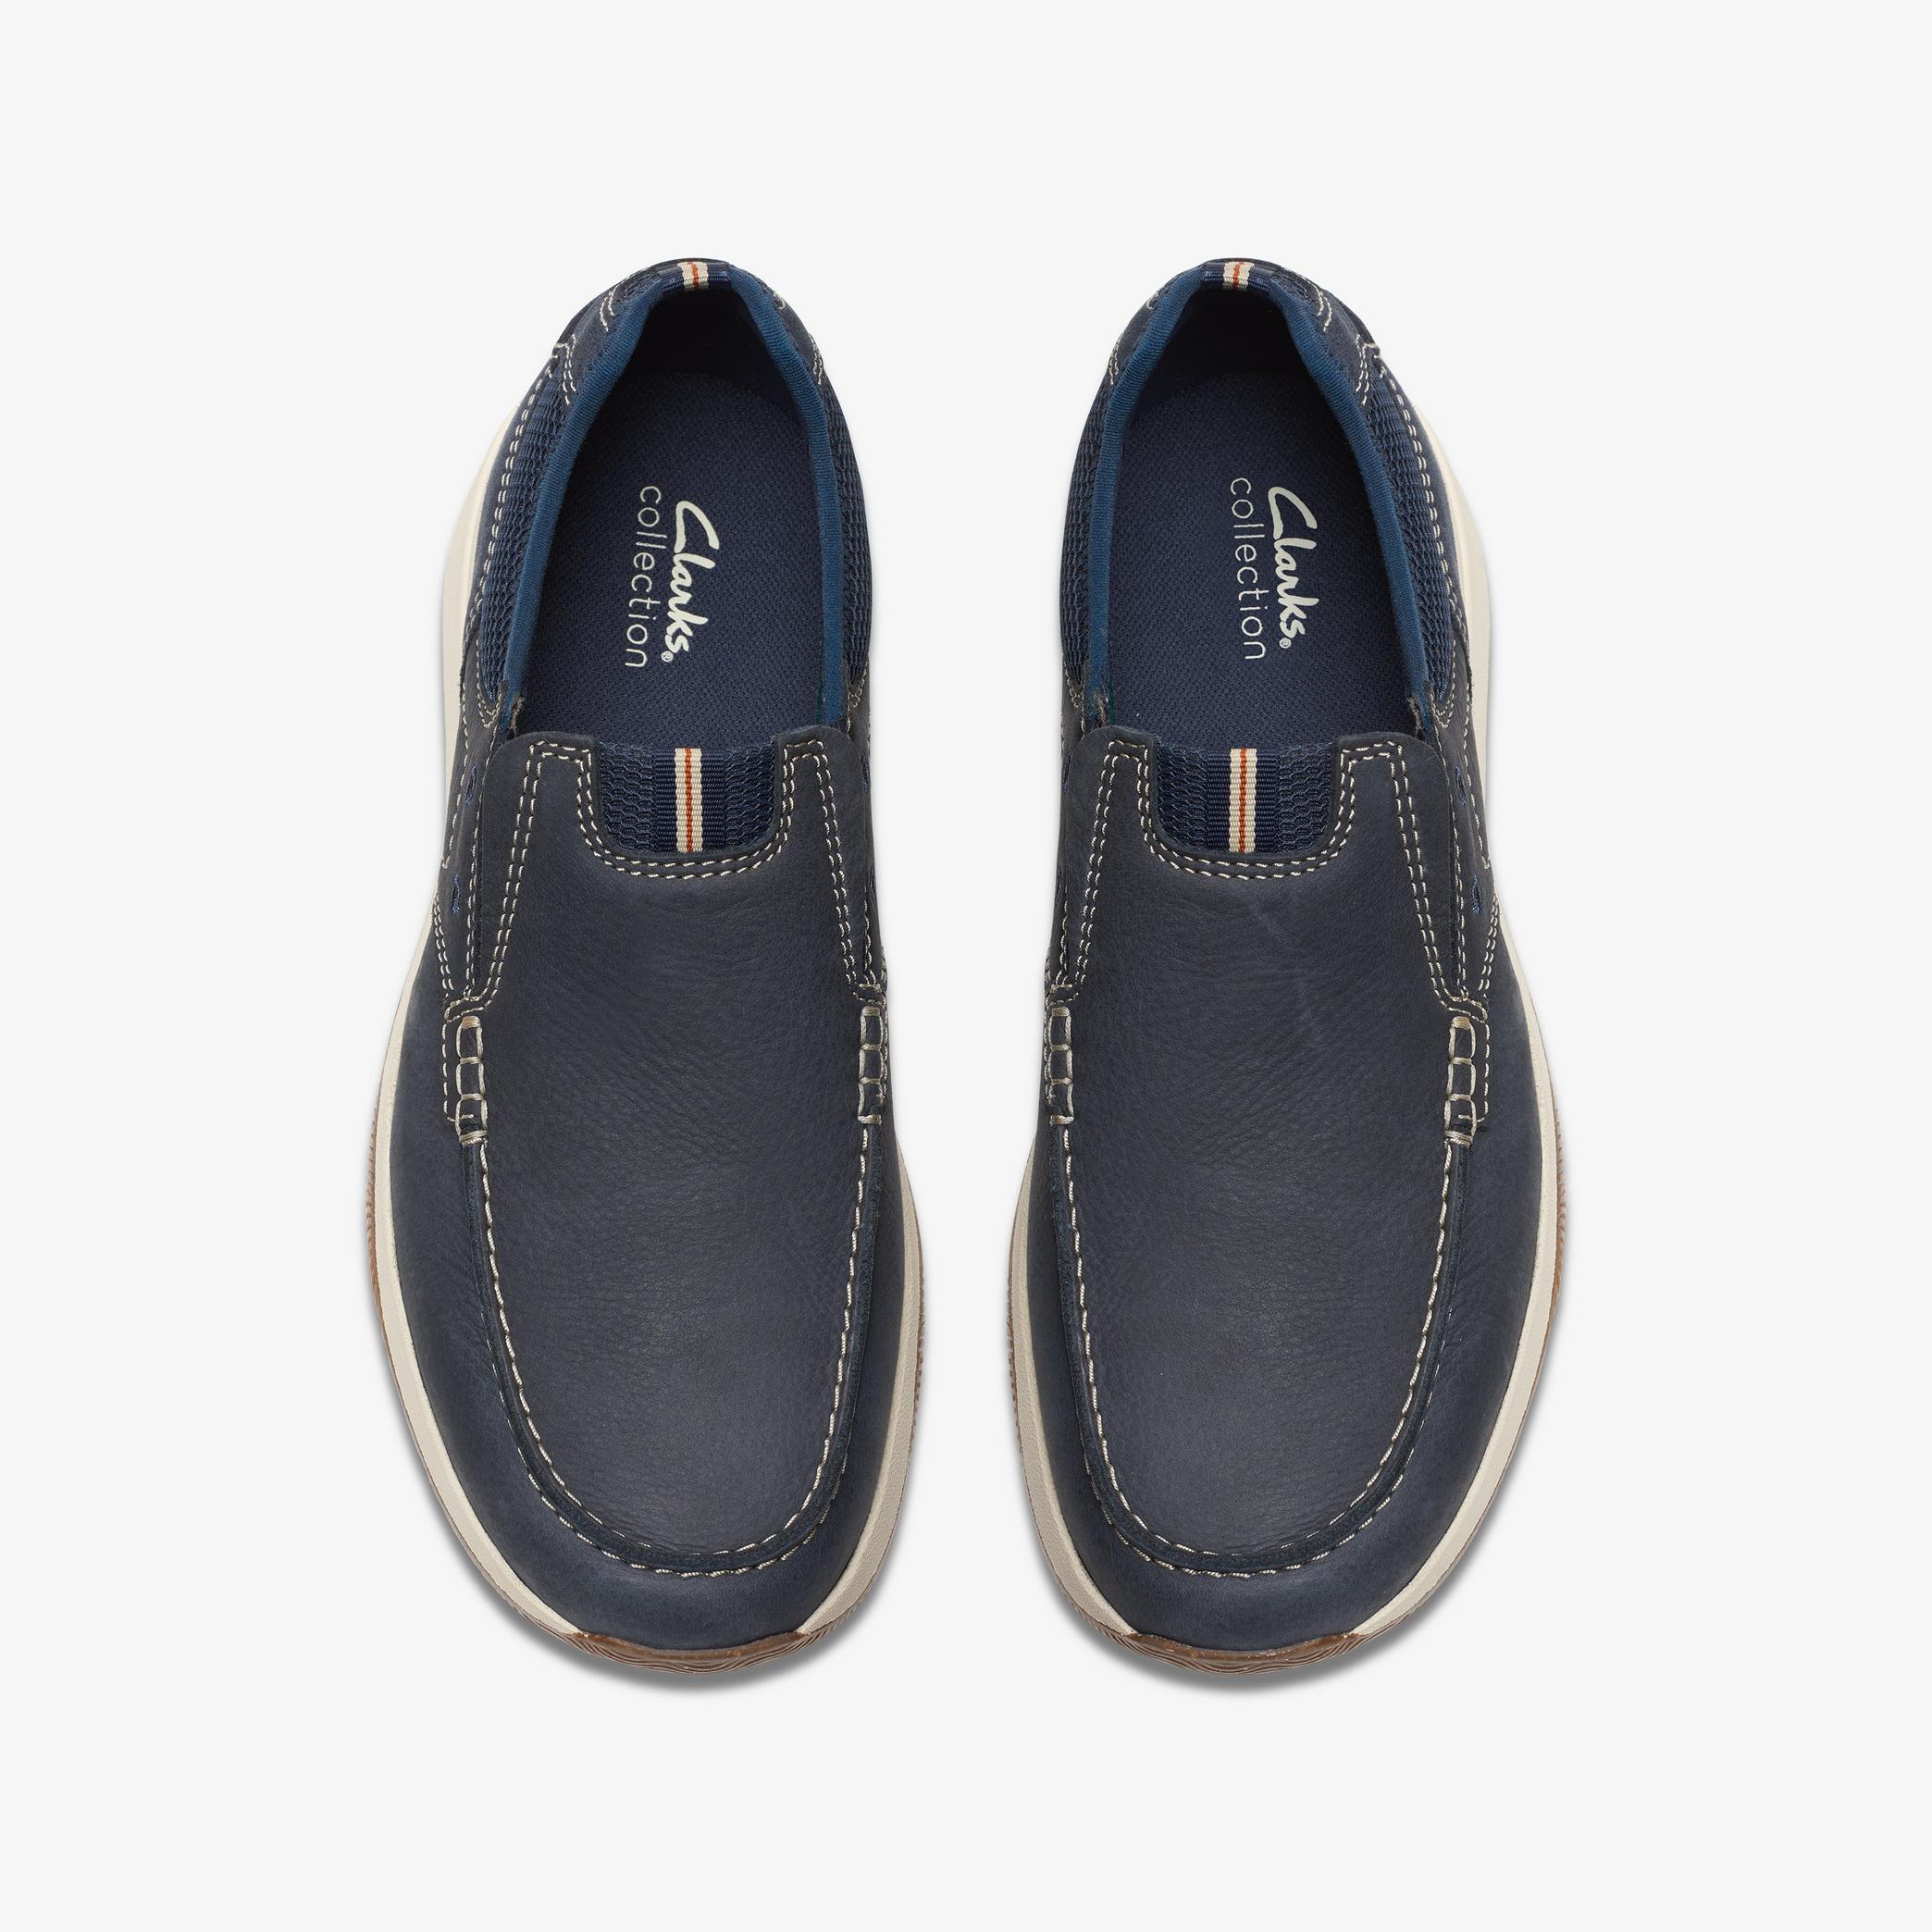 Sailview Step Navy Nubuck Boat Shoes, view 6 of 6